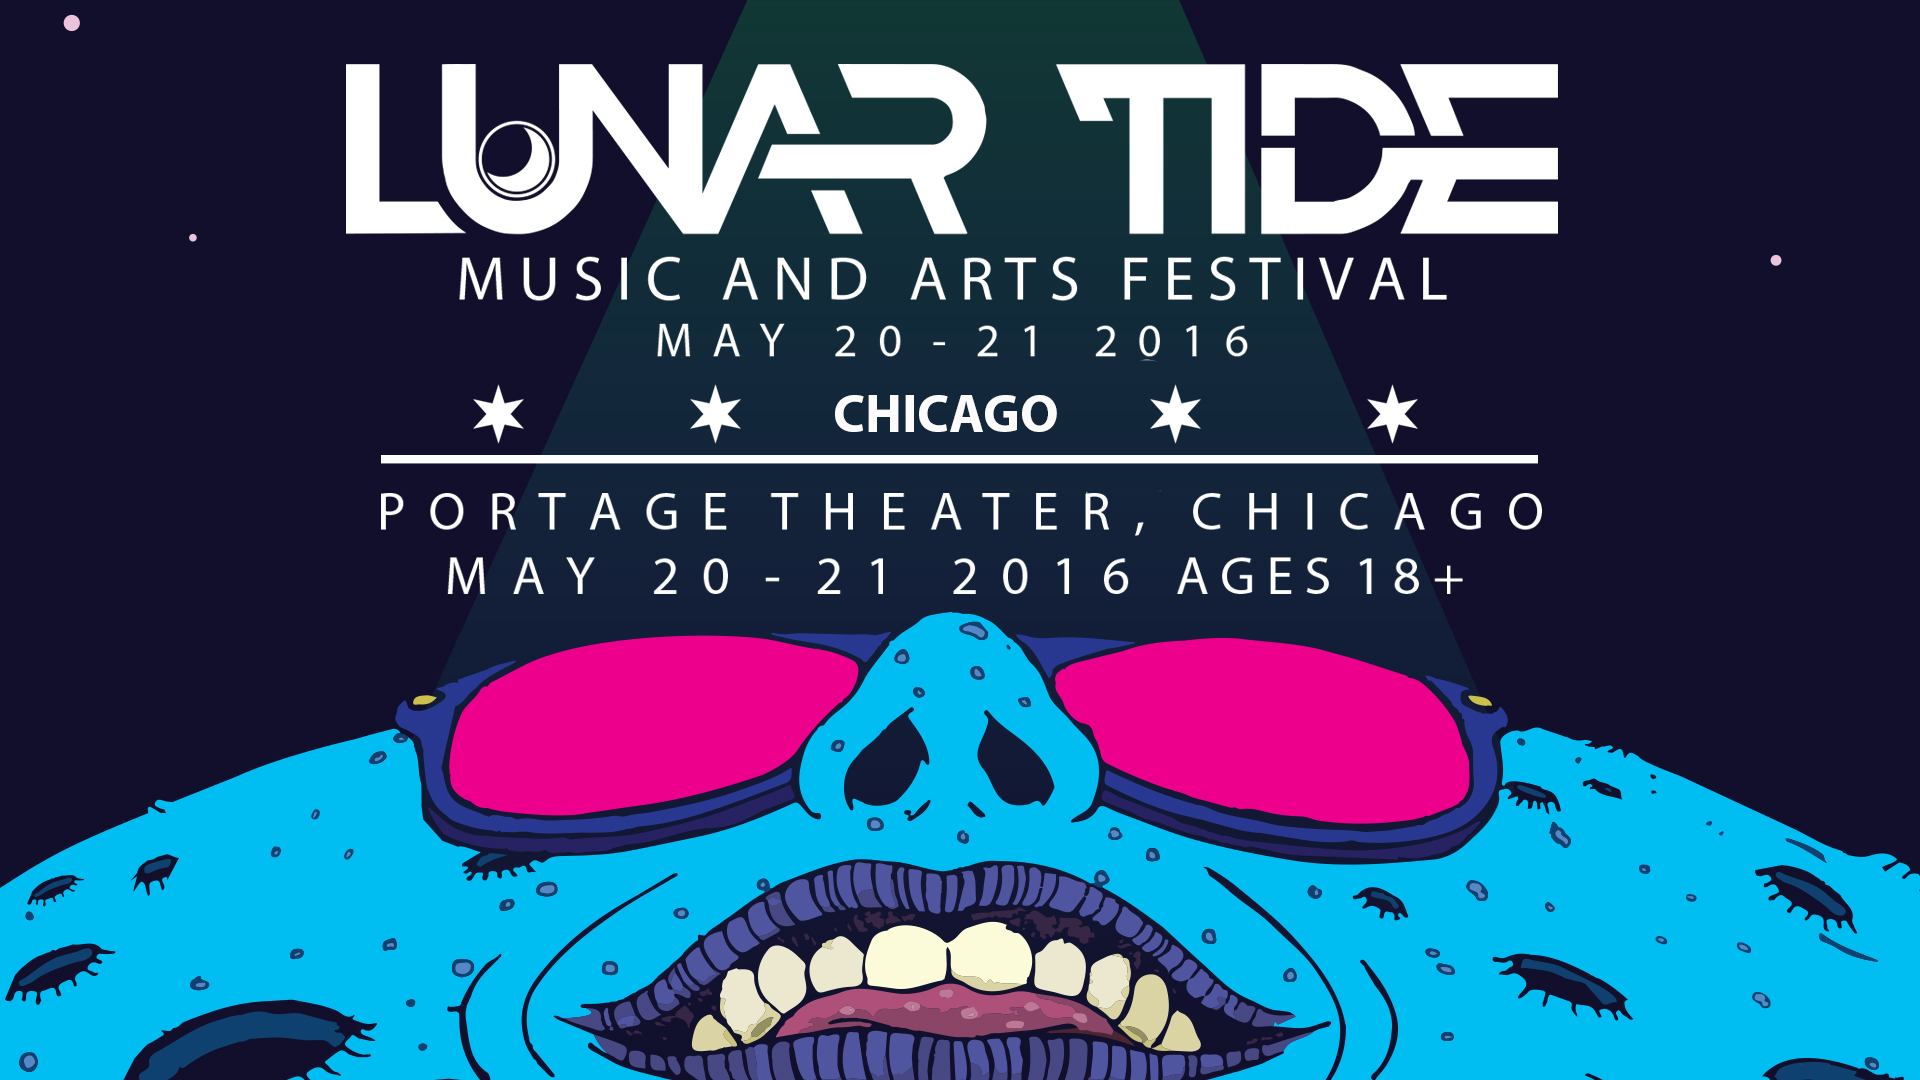 [FEST NEWS] Lunar Tide Music and Arts Festival Is Coming To Chicago’s Portage Theater